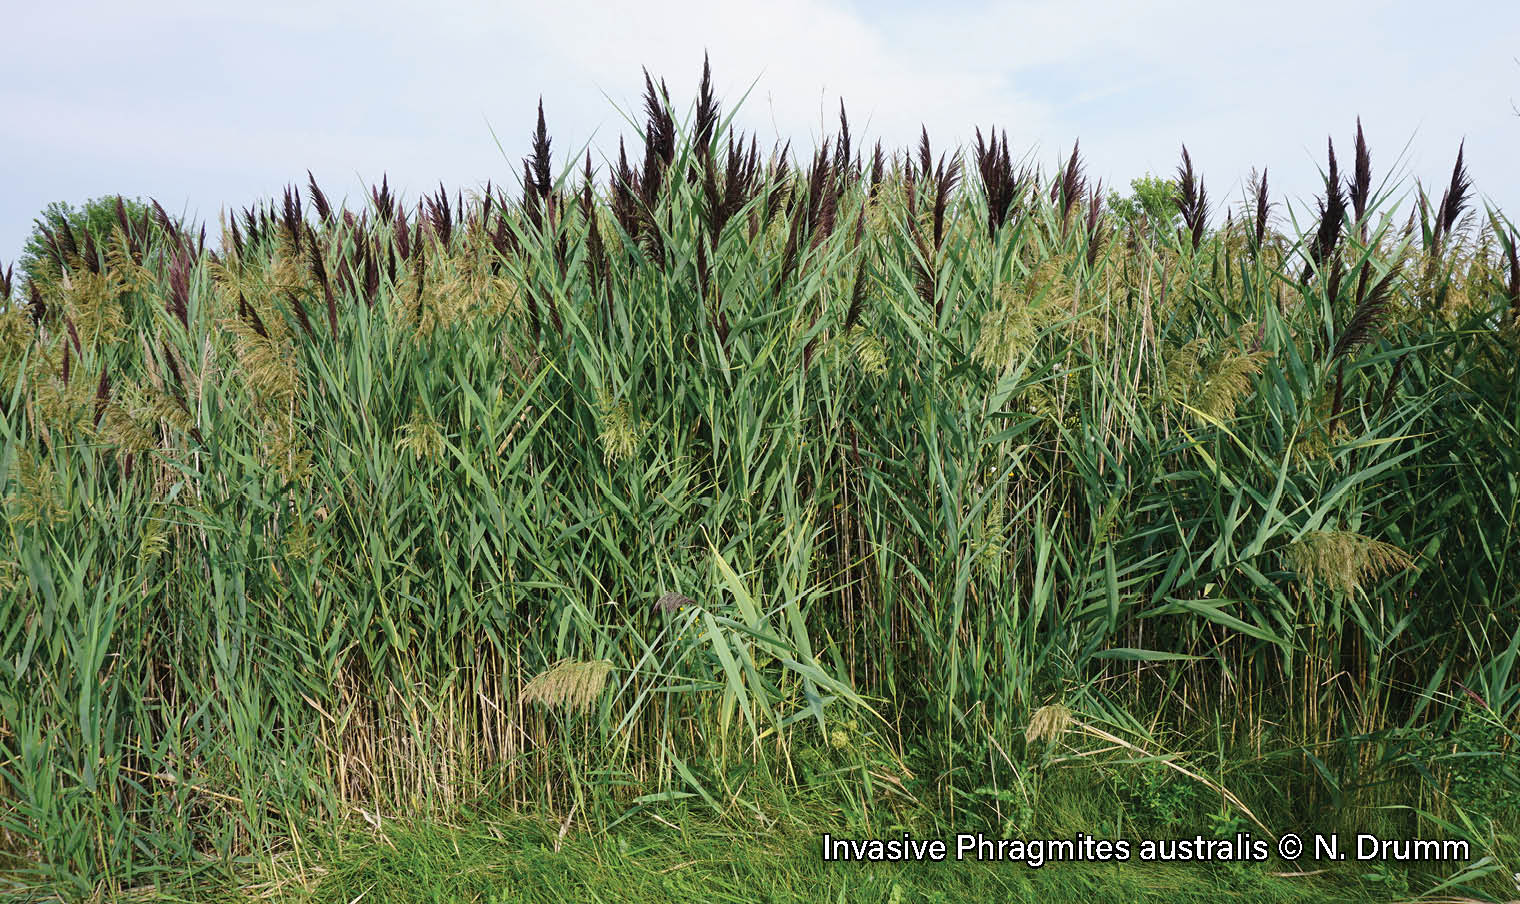 Picture of a dense stand of the Invasive Phragmites australis, a tall reed grass with large, feather-like seed heads.